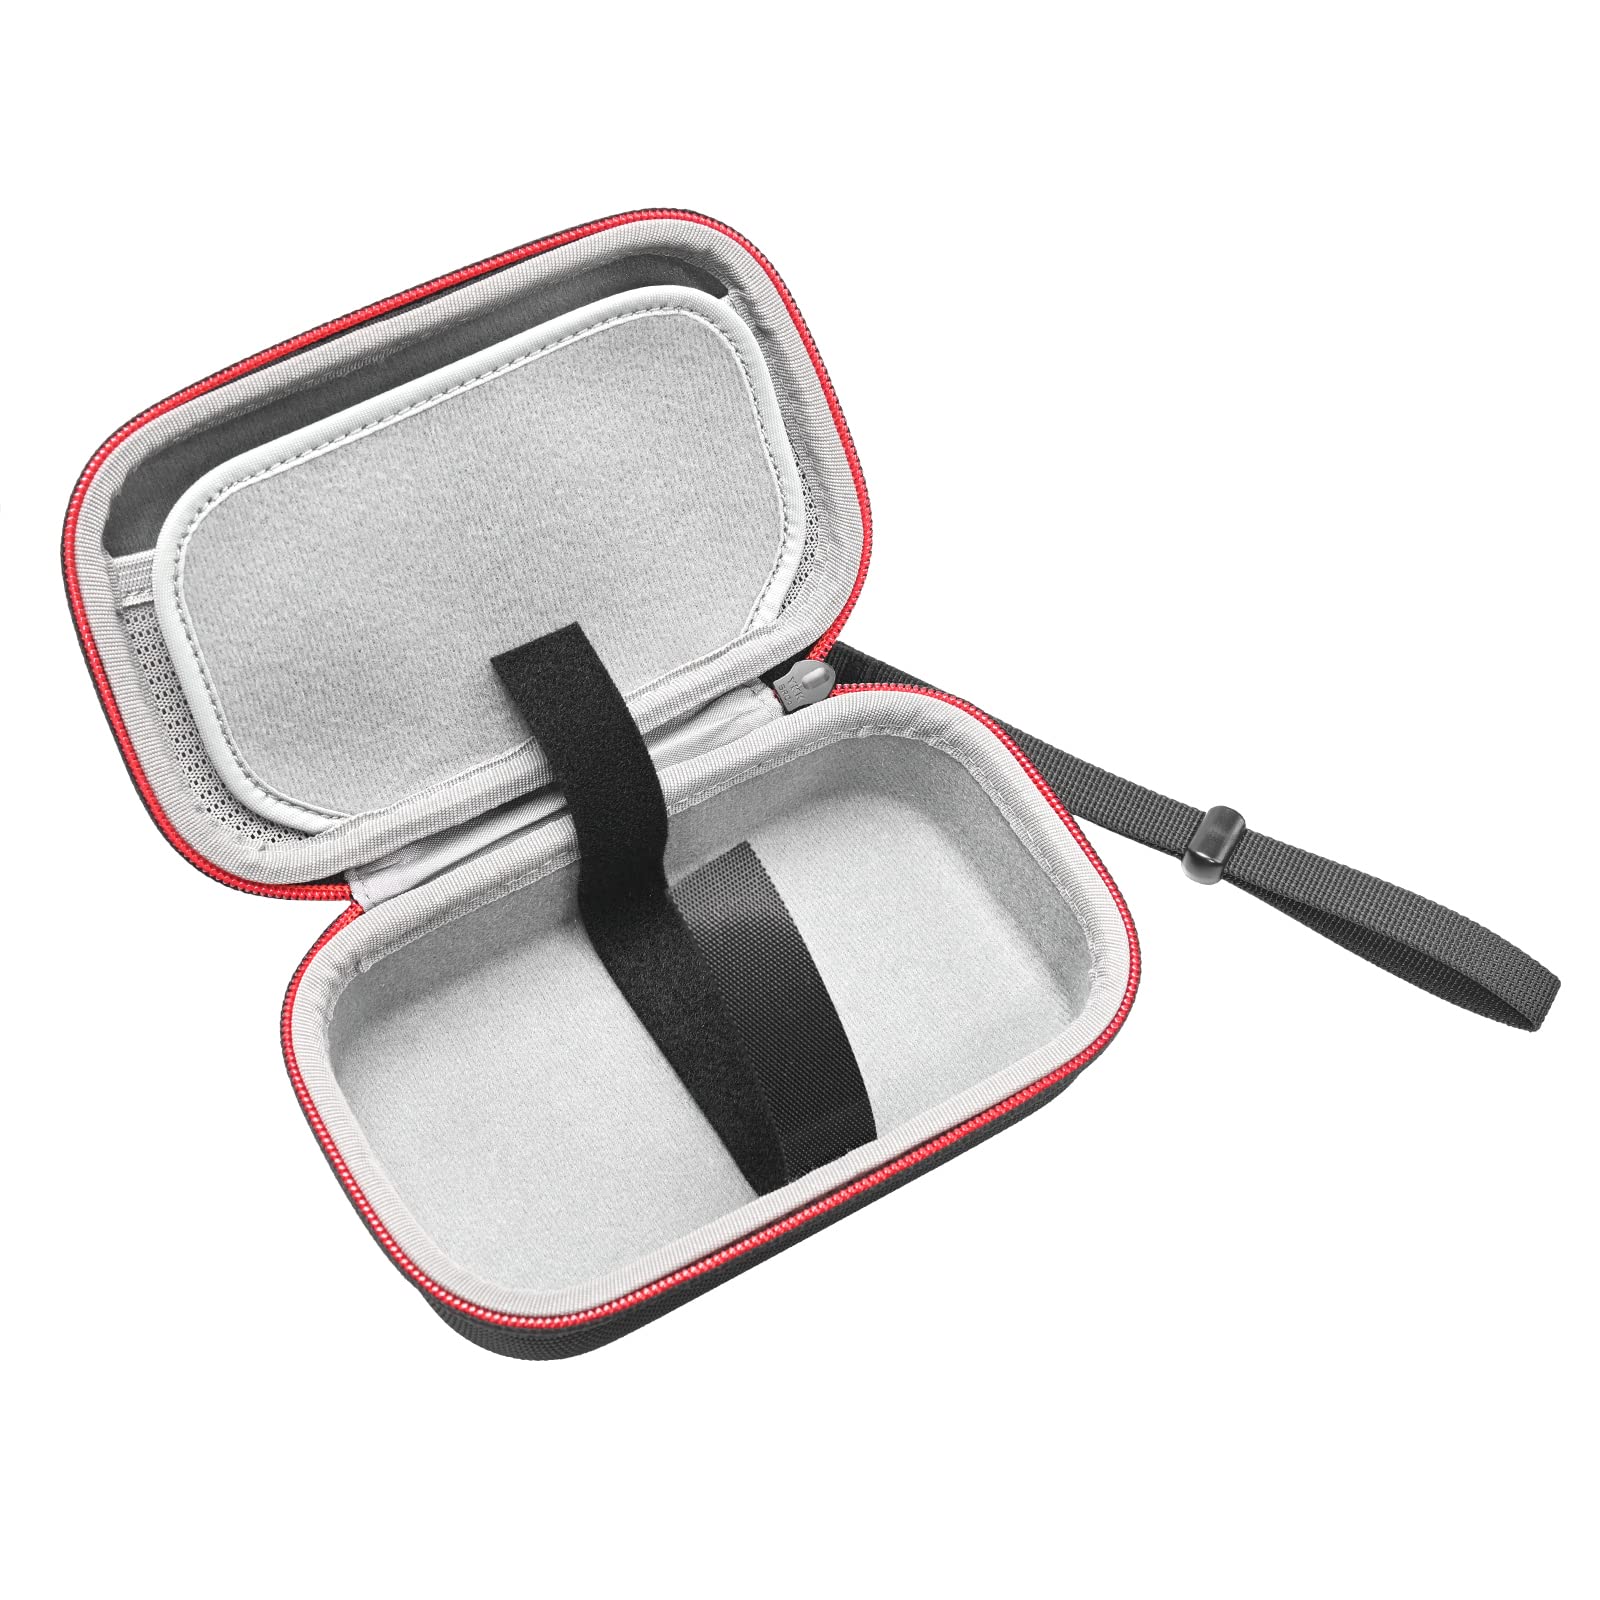 RLSOCO Carrying Case for Trifield EMF Meter Model TF2 Magnetic Field Strength Meter (Case Only)